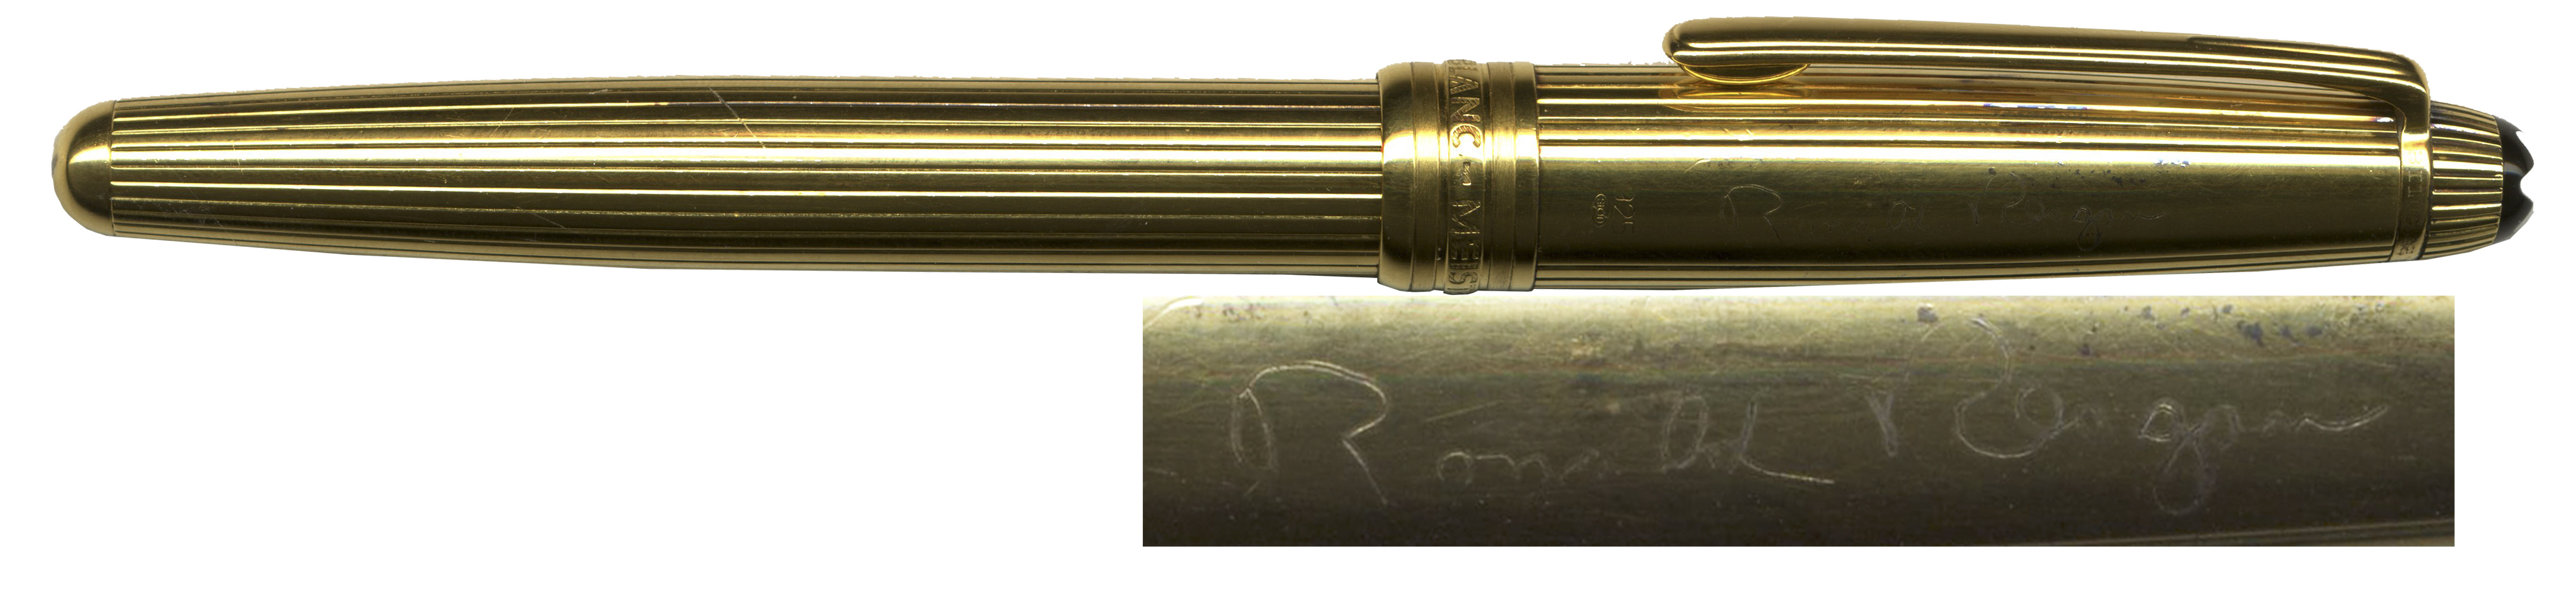 Ronald Reagan Memorabilia Auction Ronald Reagan Mont Blanc Meisterstuck Engraved Pen -- Personally Owned & Used by Ronald Reagan, The Great Communicator